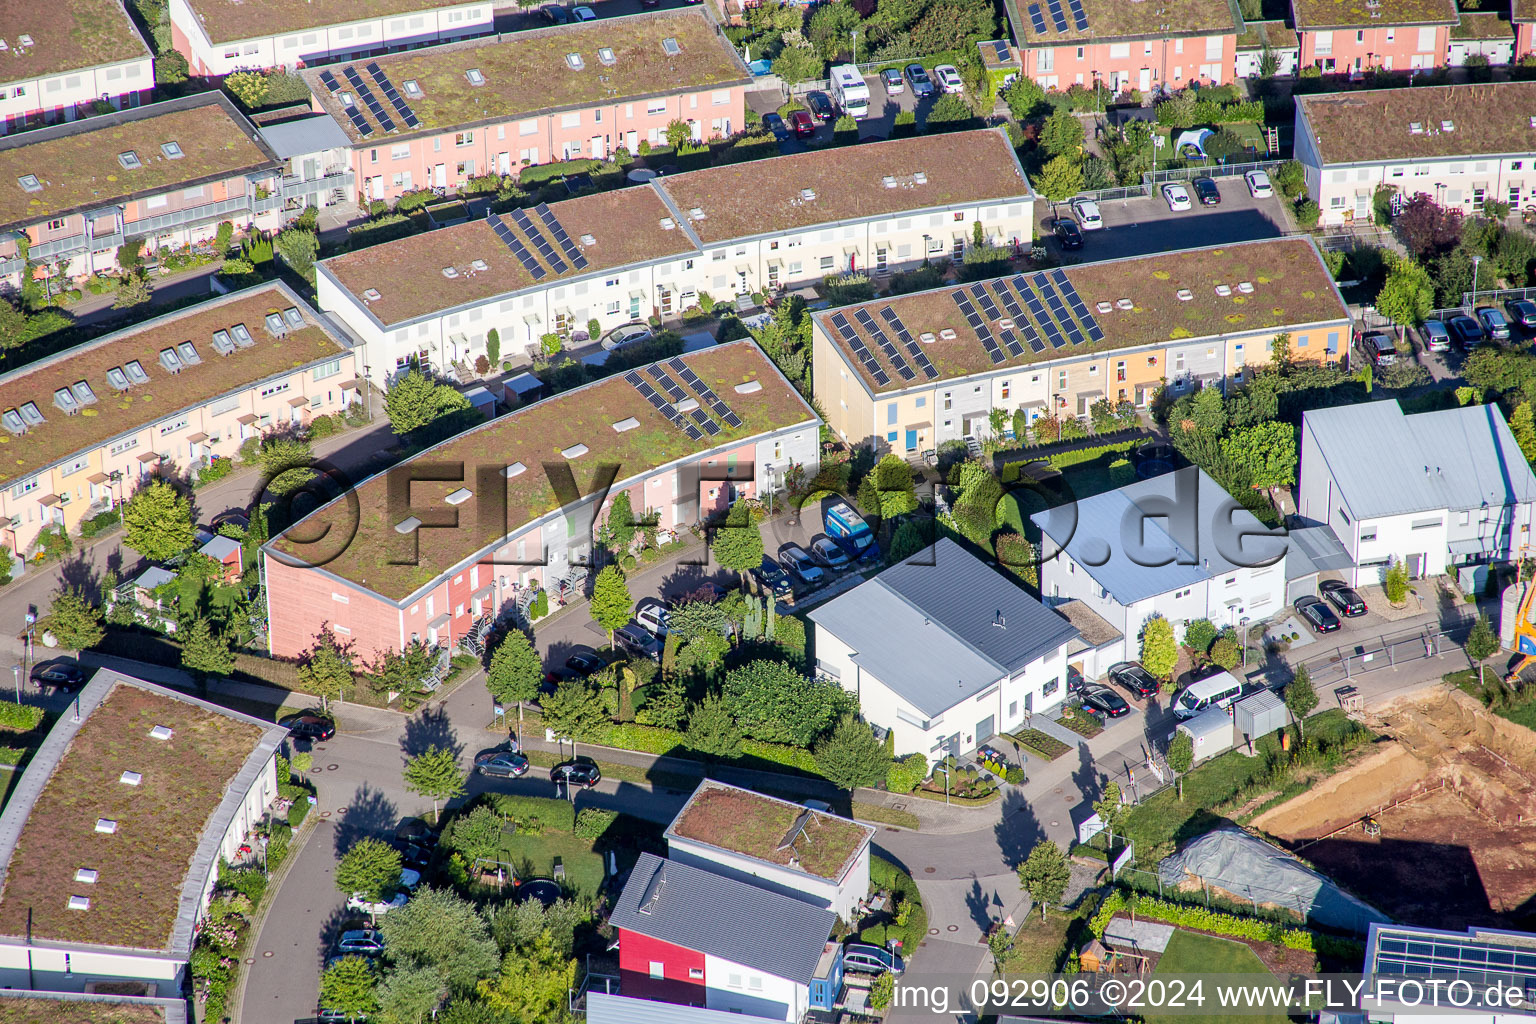 Aerial view of Single-family residential area of settlement Fuenfzig Morgen in Hohenwettersbach in the state Baden-Wurttemberg, Germany